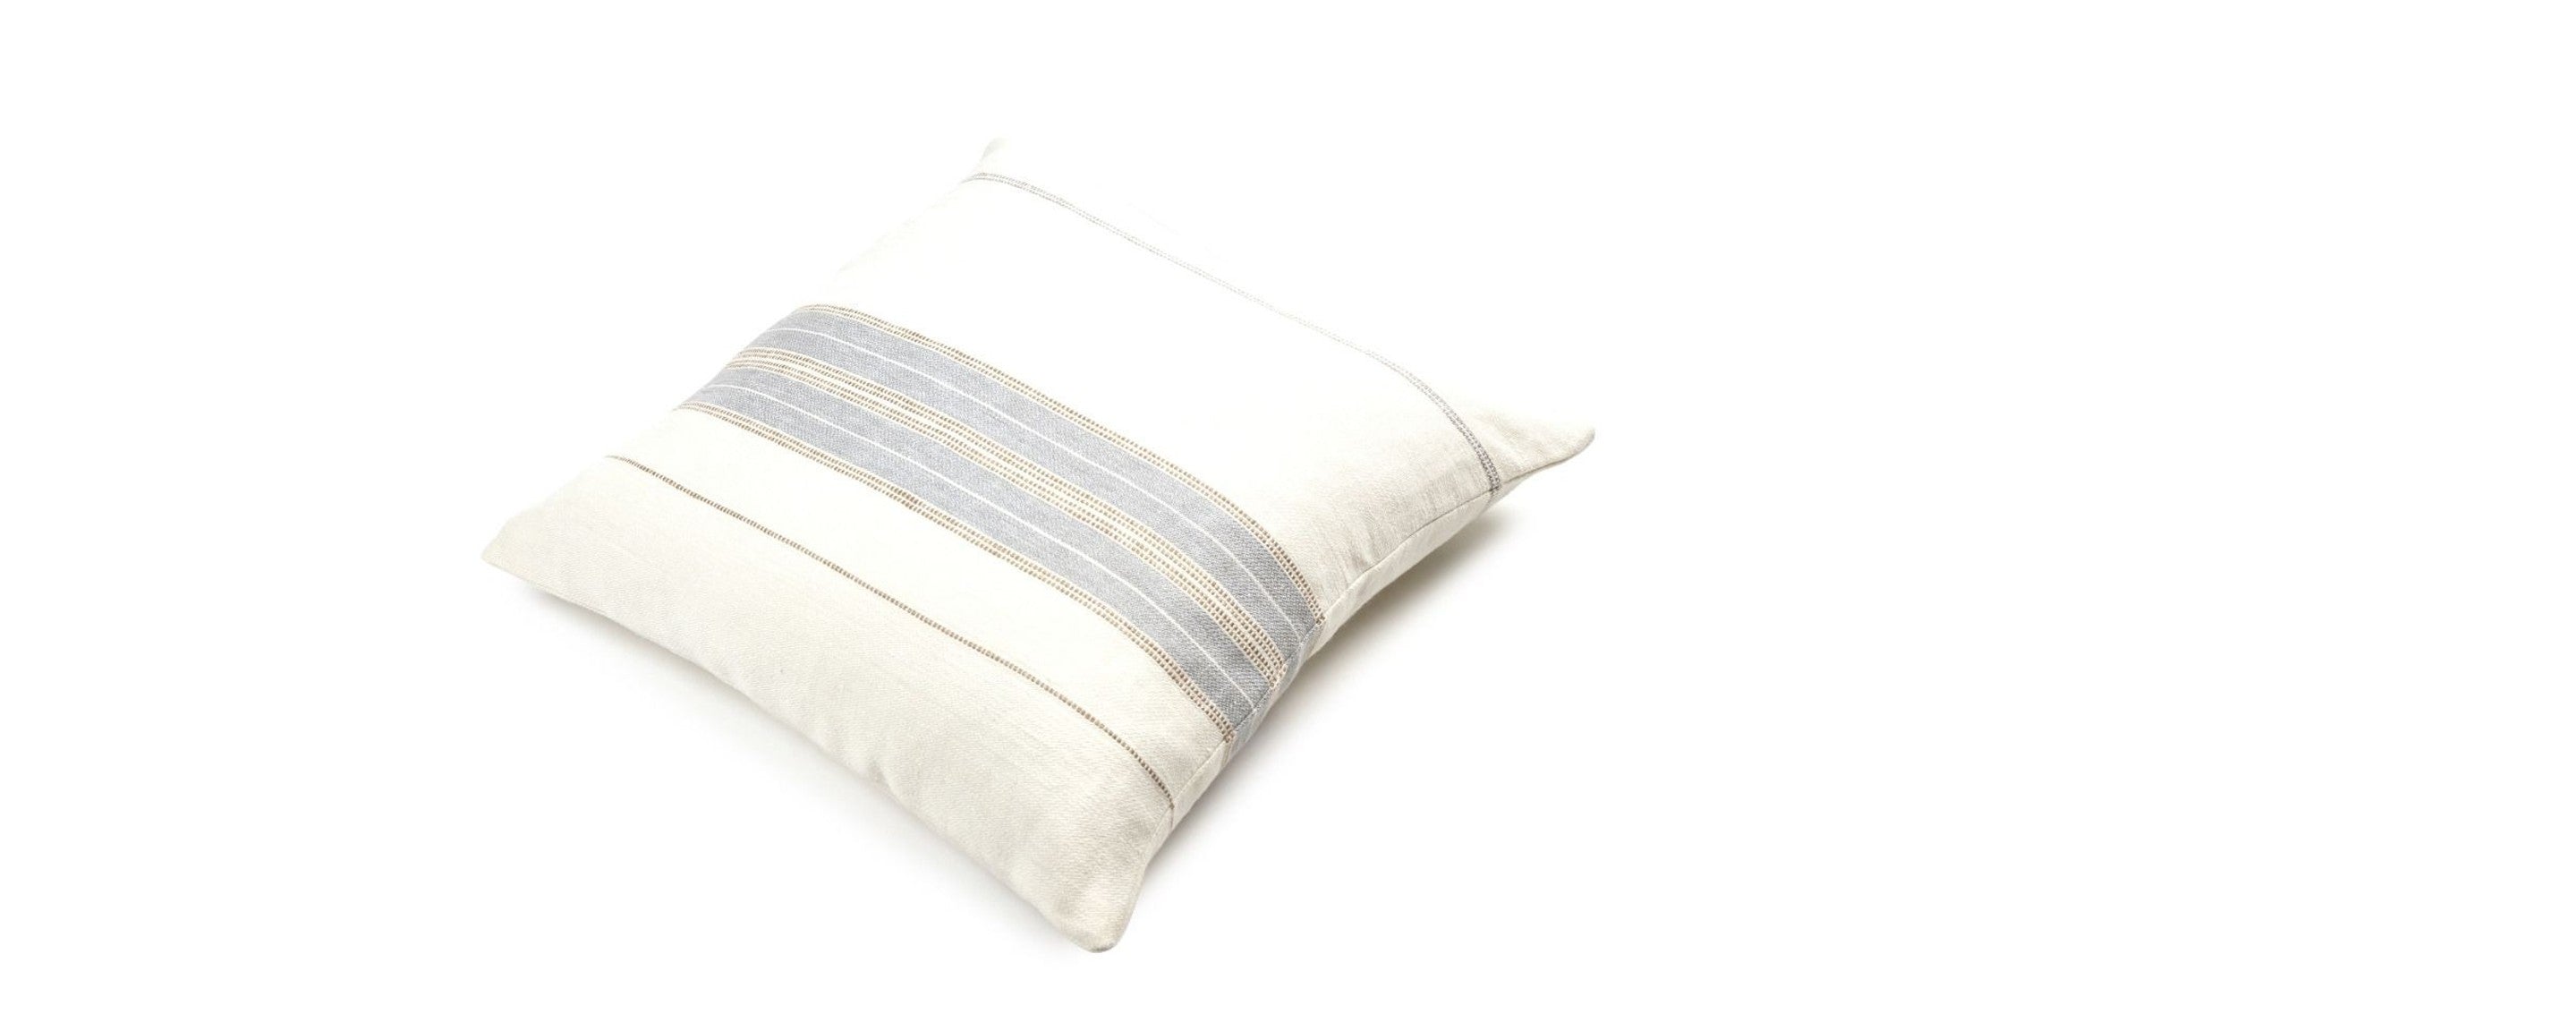 propriano pillow collection